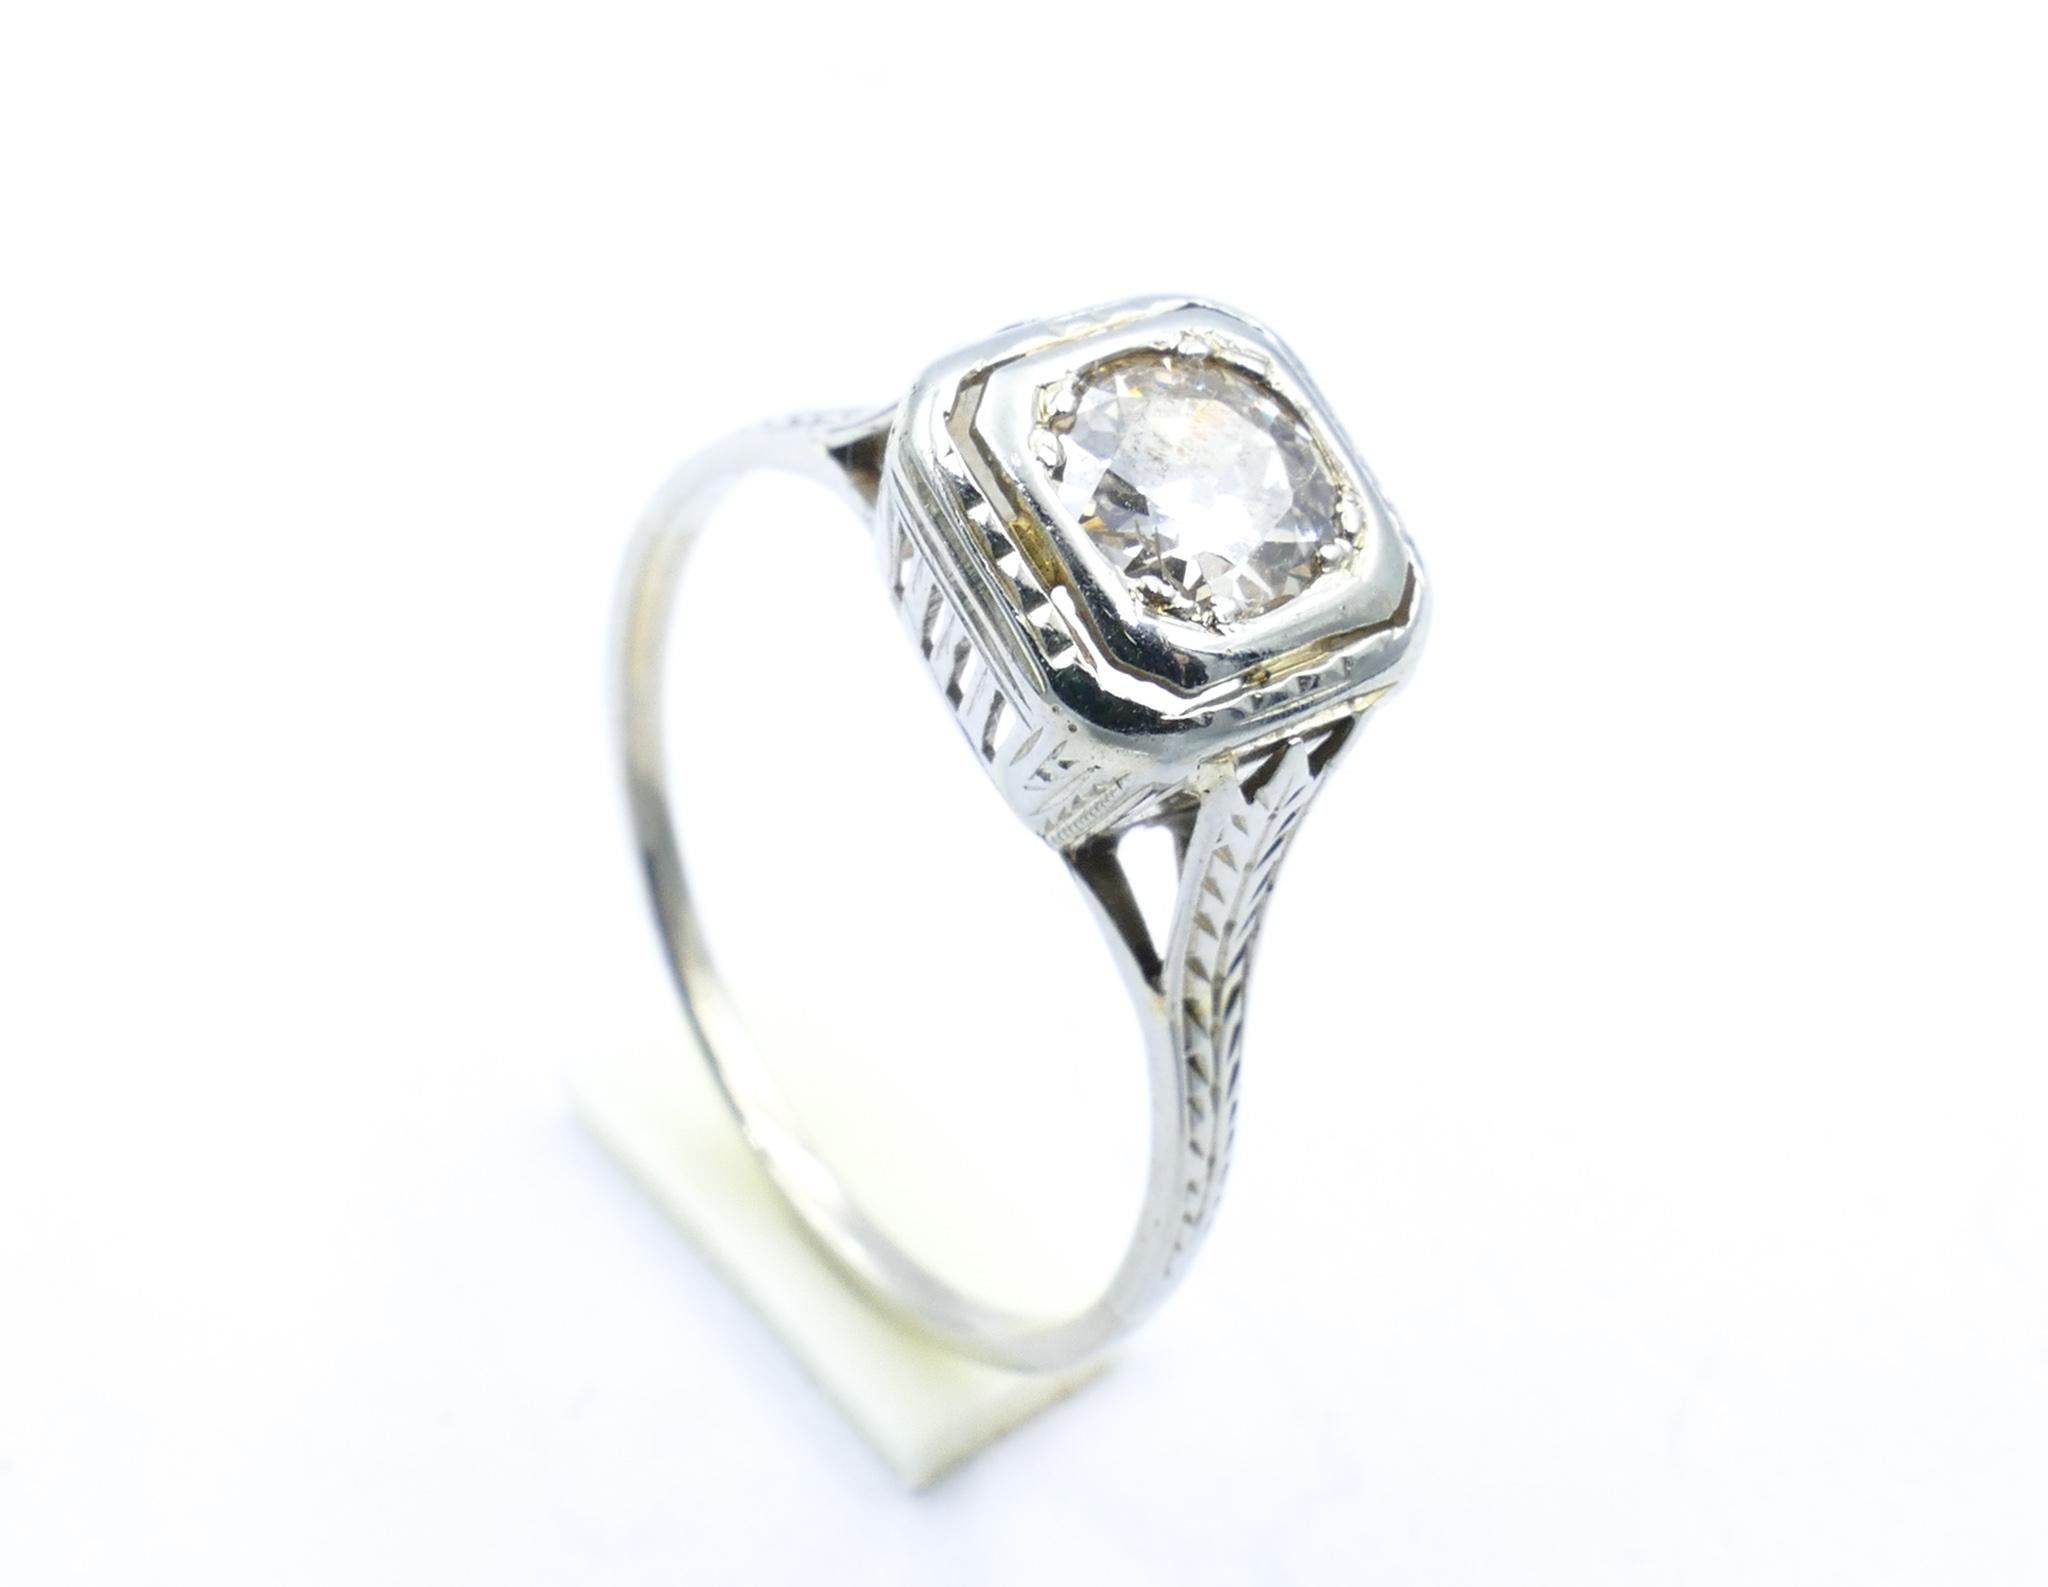 This gorgeous Art Deco Ring, Circa 1925, really has quite a large Diamond of nearly half a carat as its centrepiece.
It is bead set in 18ct White Gold with feathered engraving on the shoulders.
The Diamond is a good quality J and really does quite